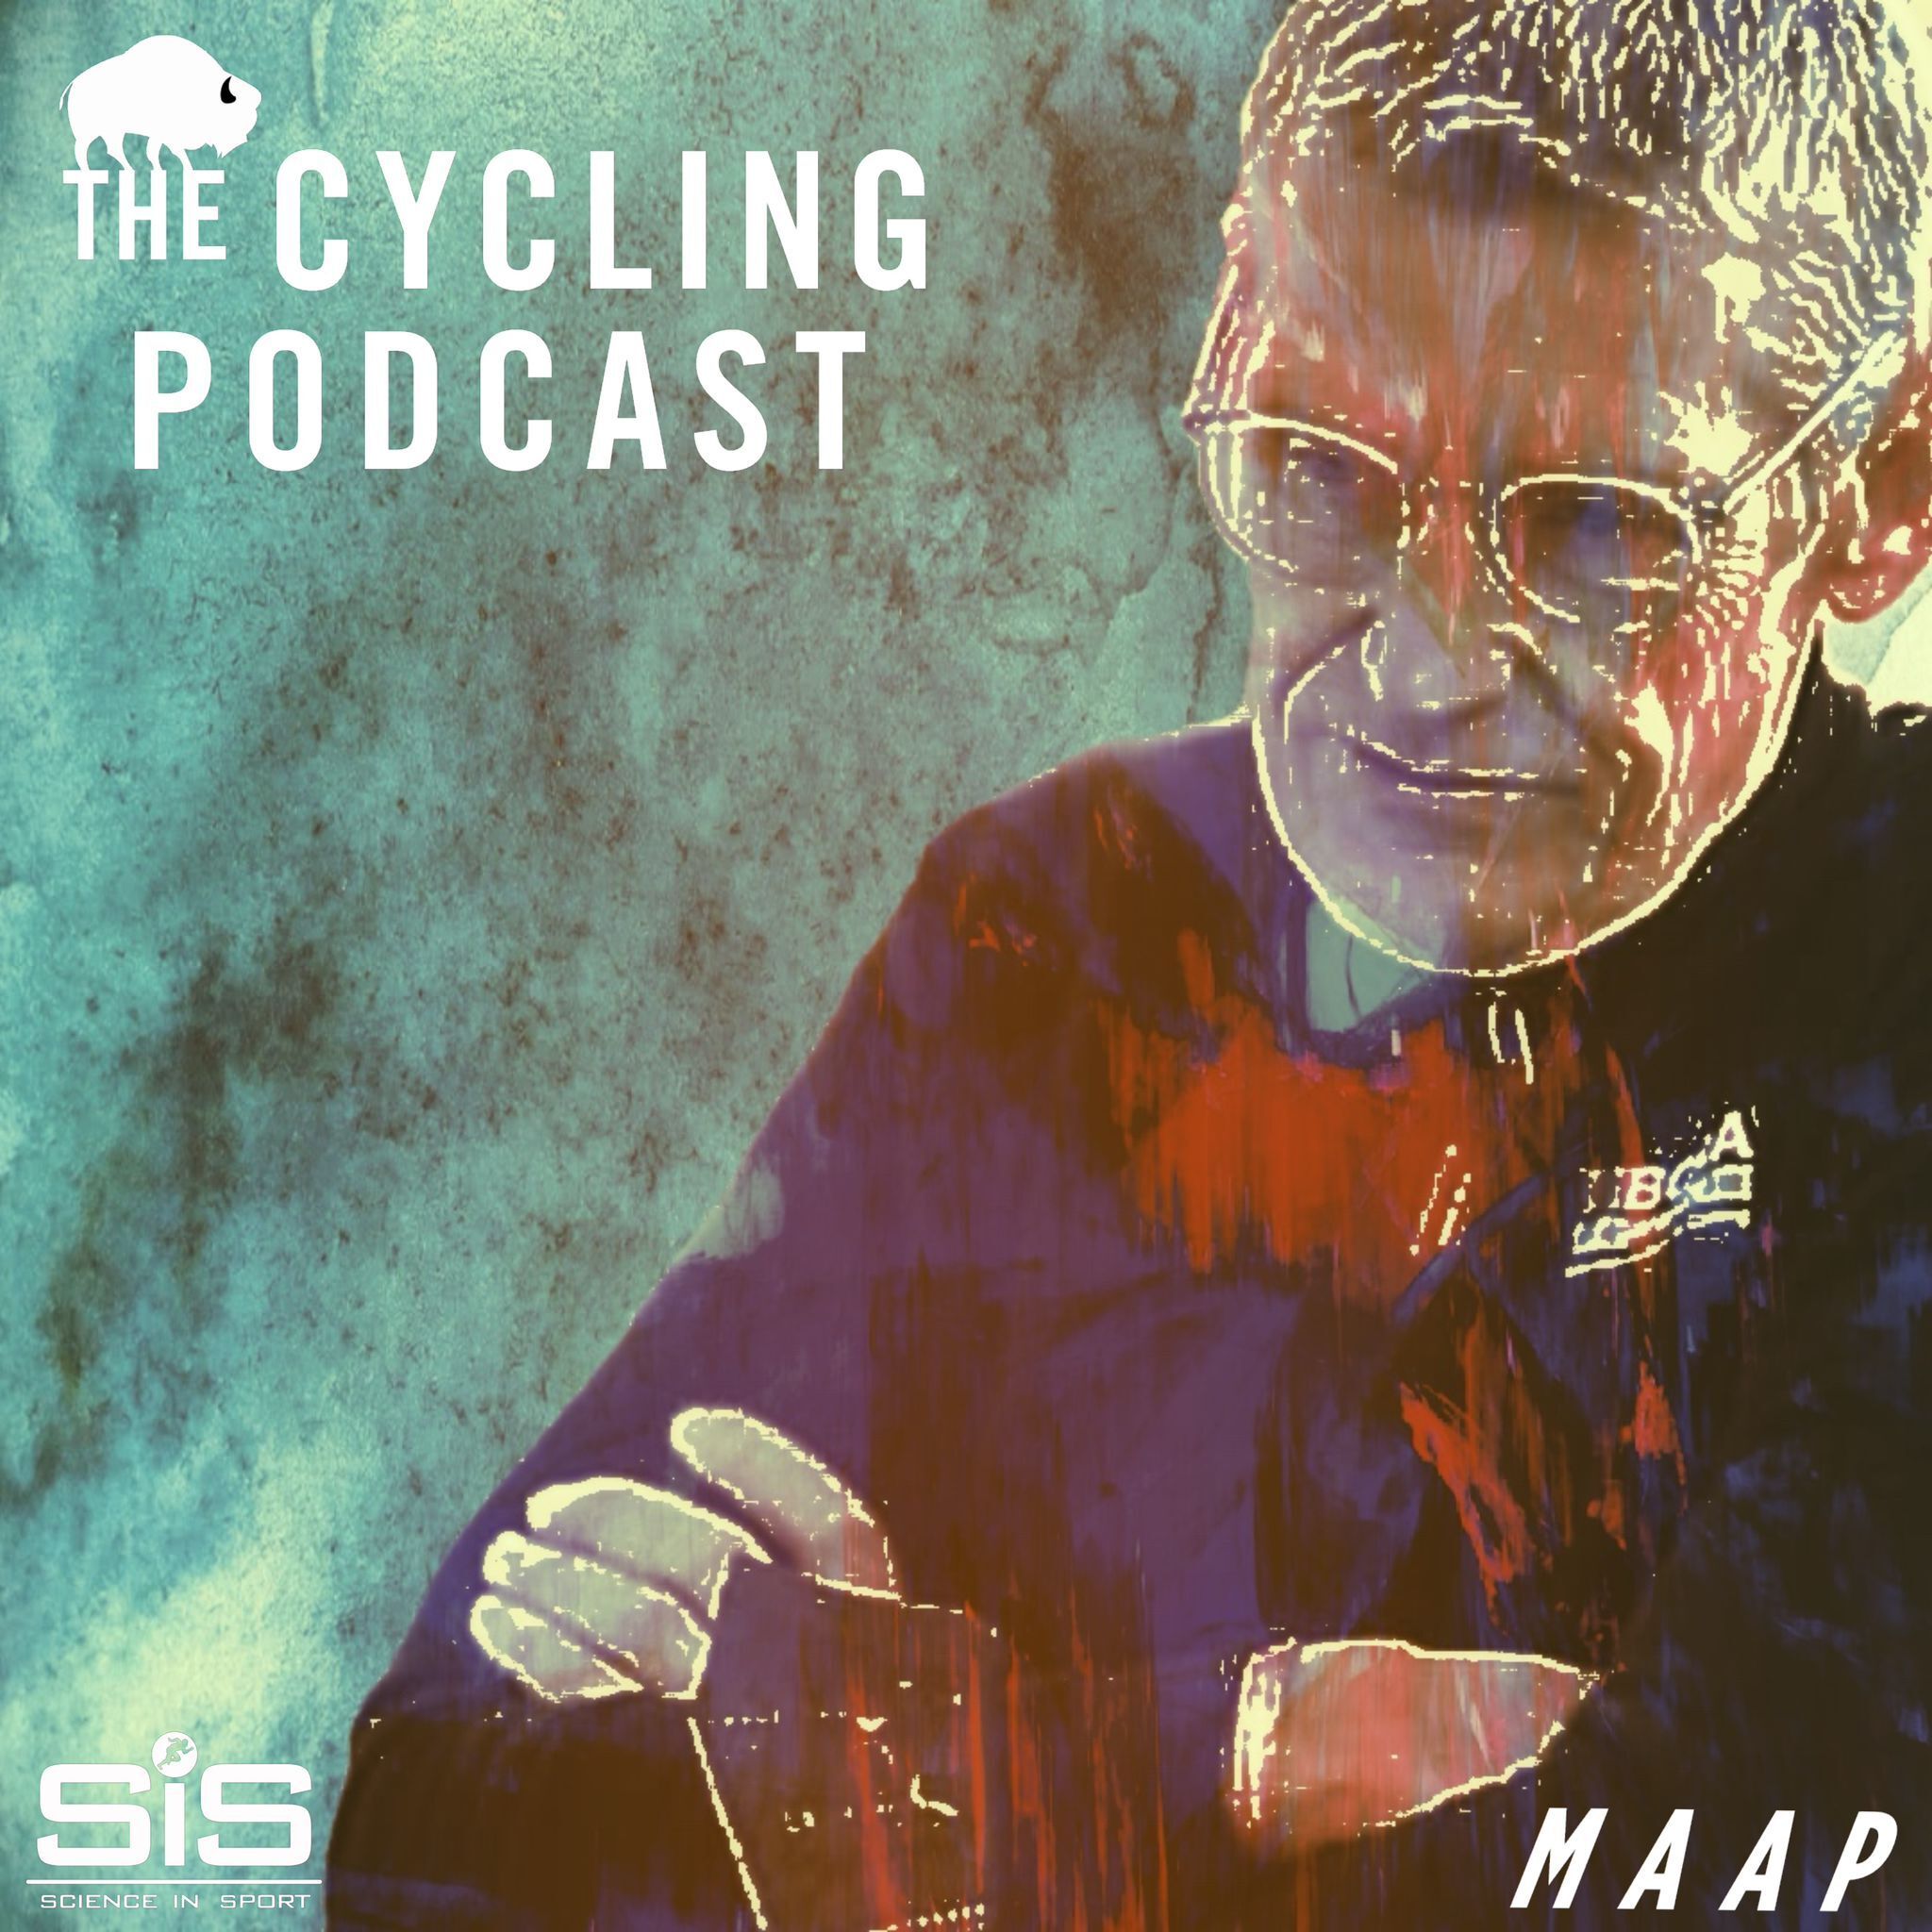 The Cycling Podcast / Rolf Lessons